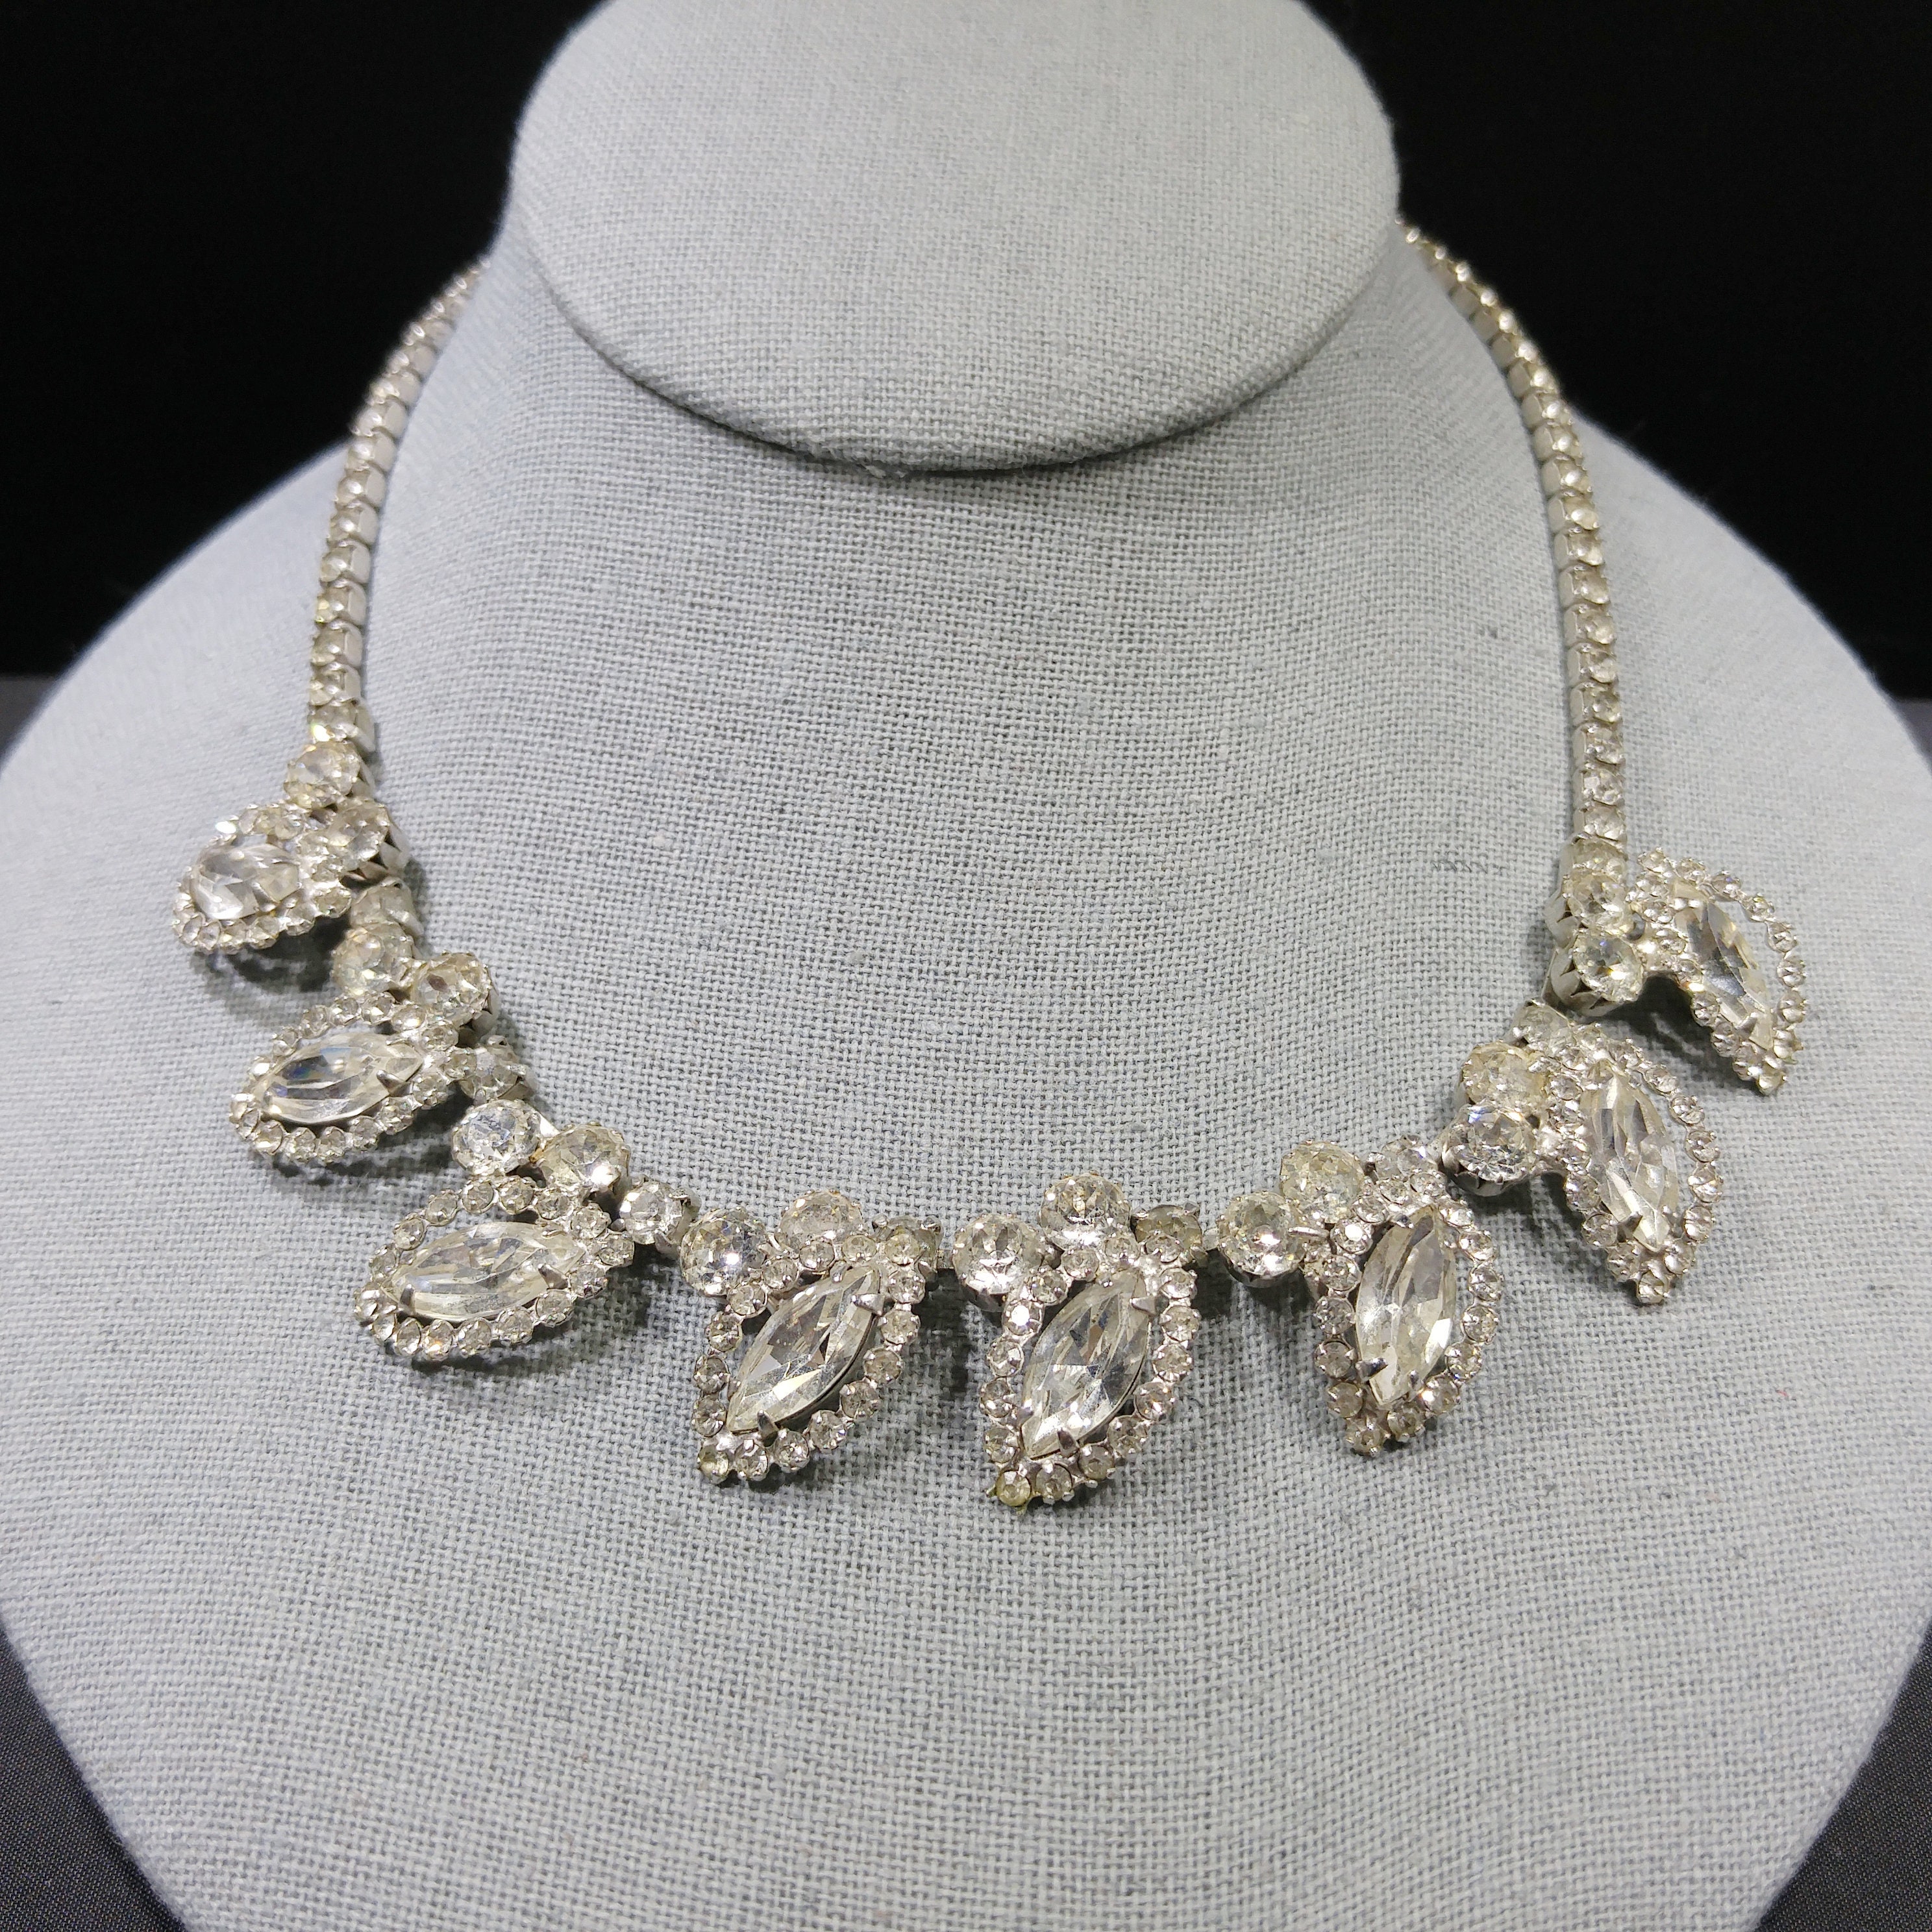 Vintage Rhinestone Swags Necklace - Garden Party Collection Vintage Jewelry